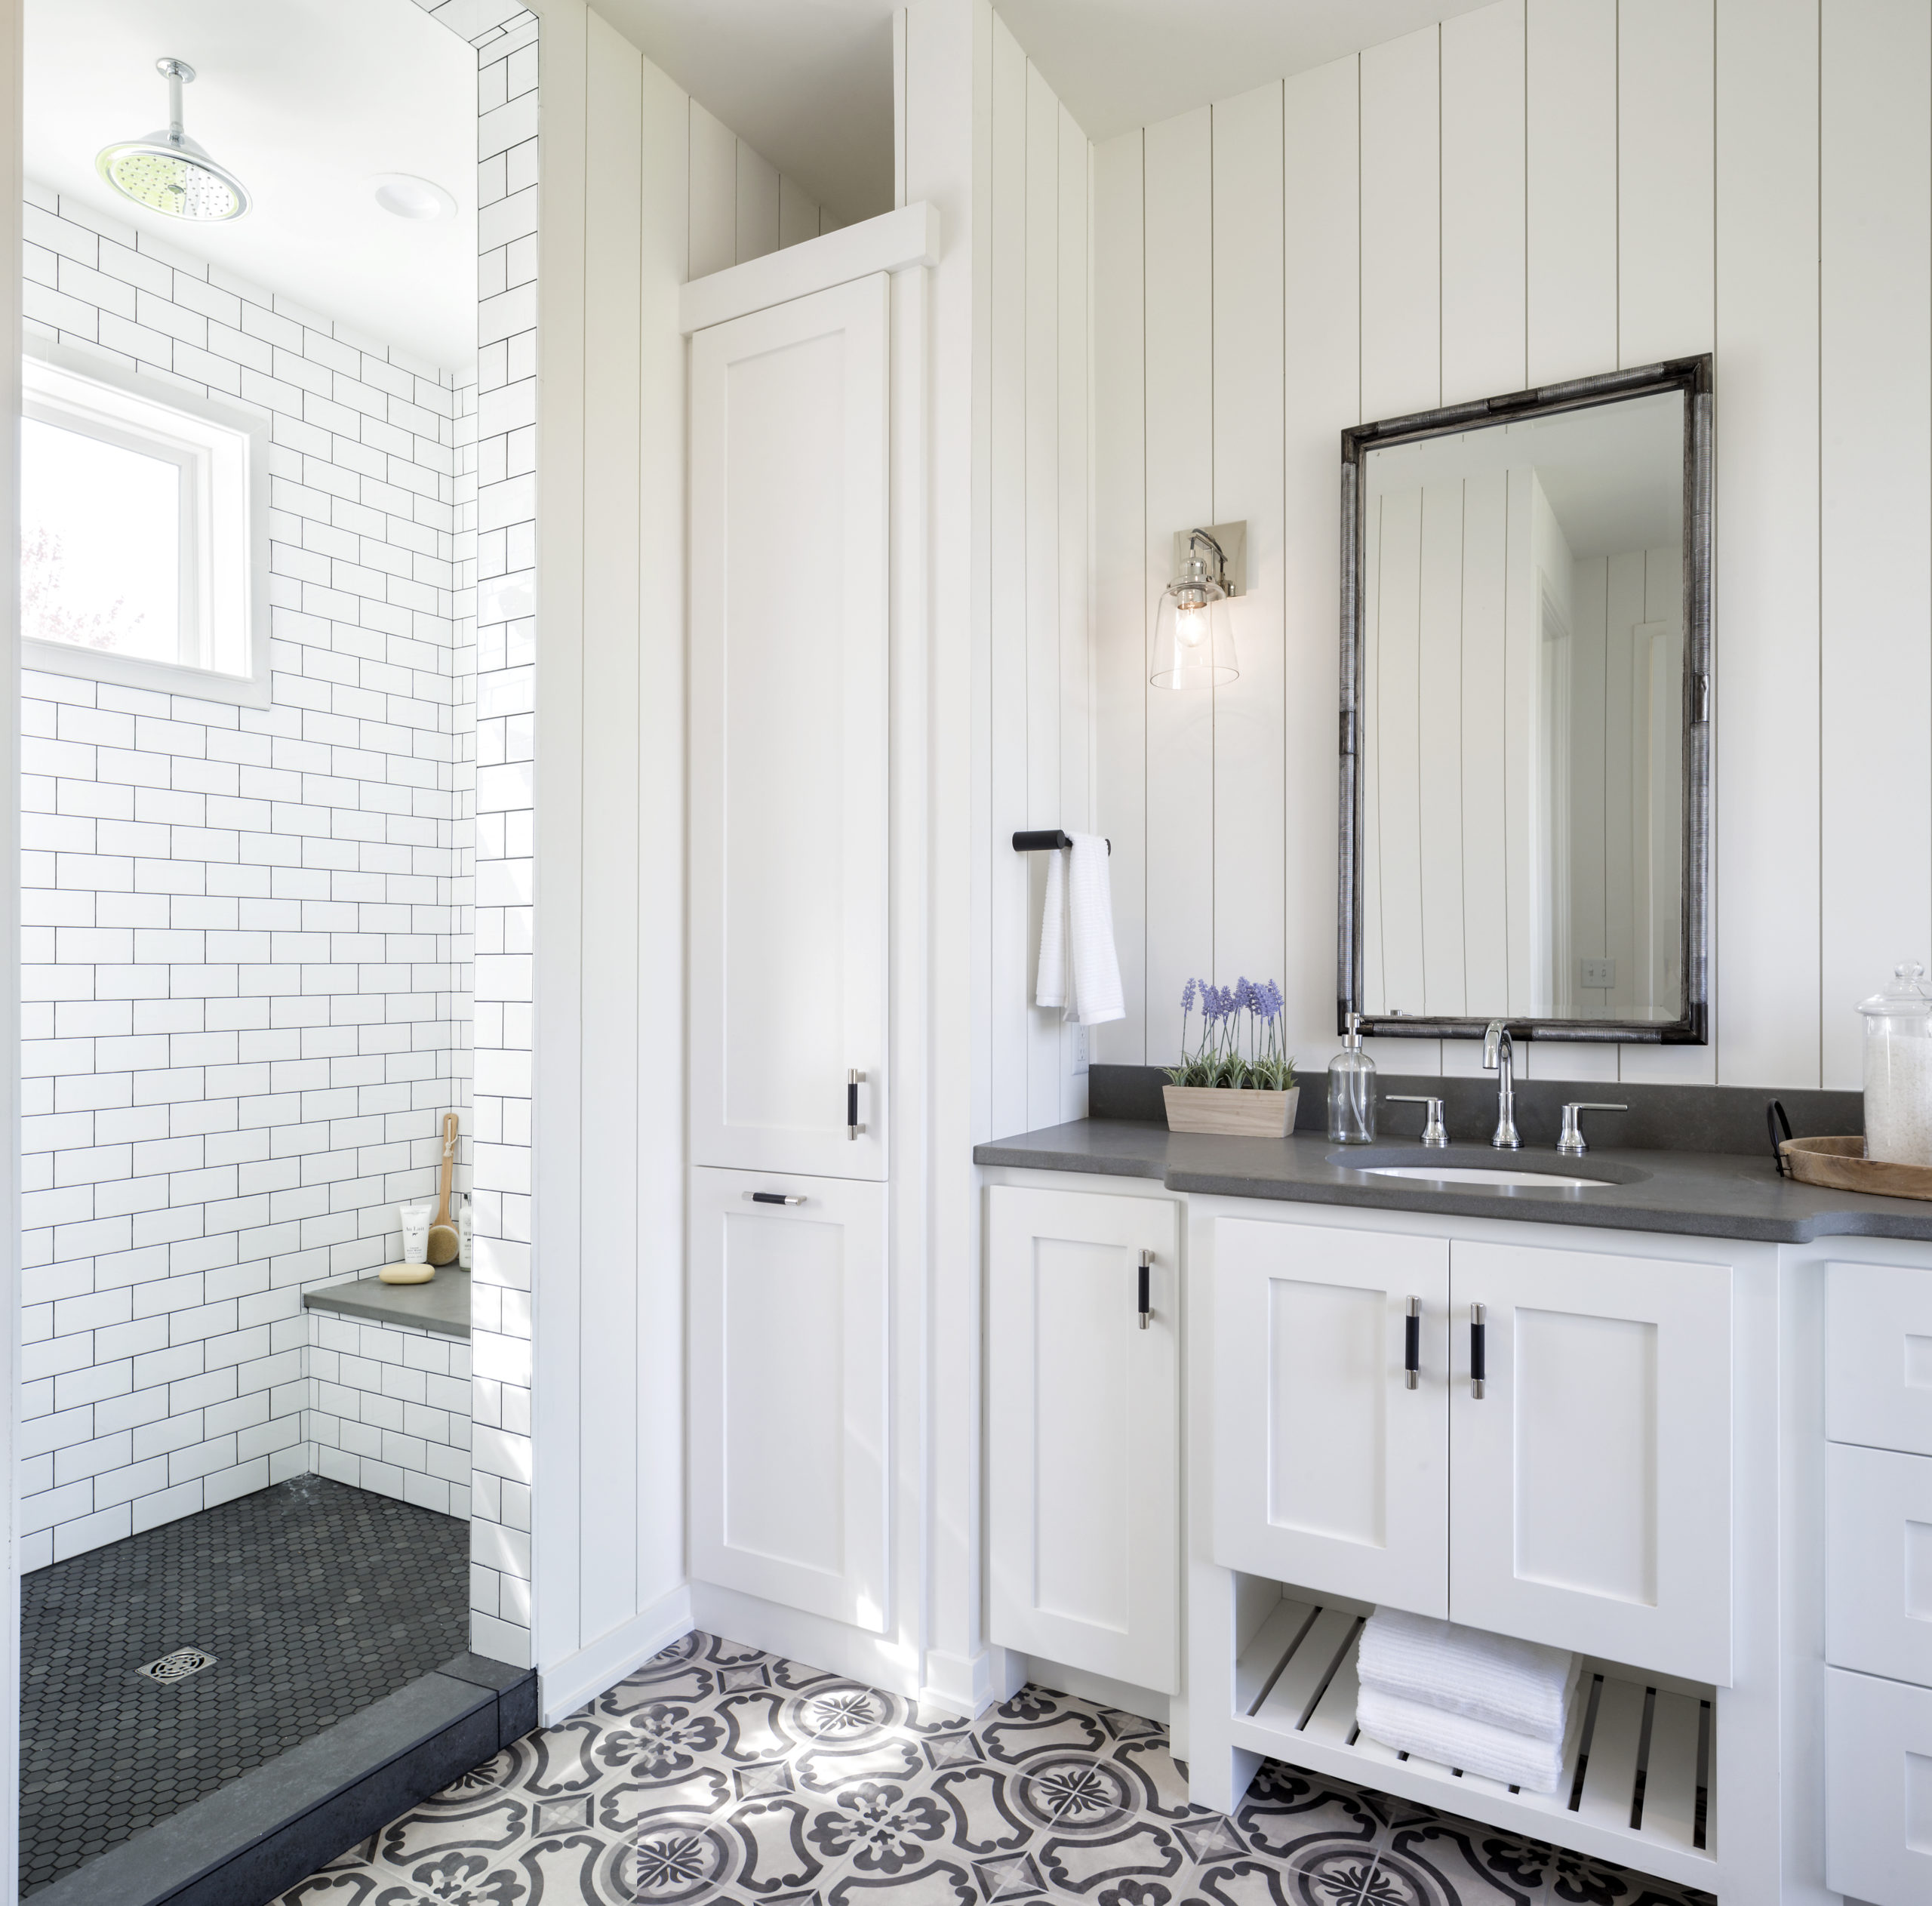 A white and black bathroom with a tiled floor.